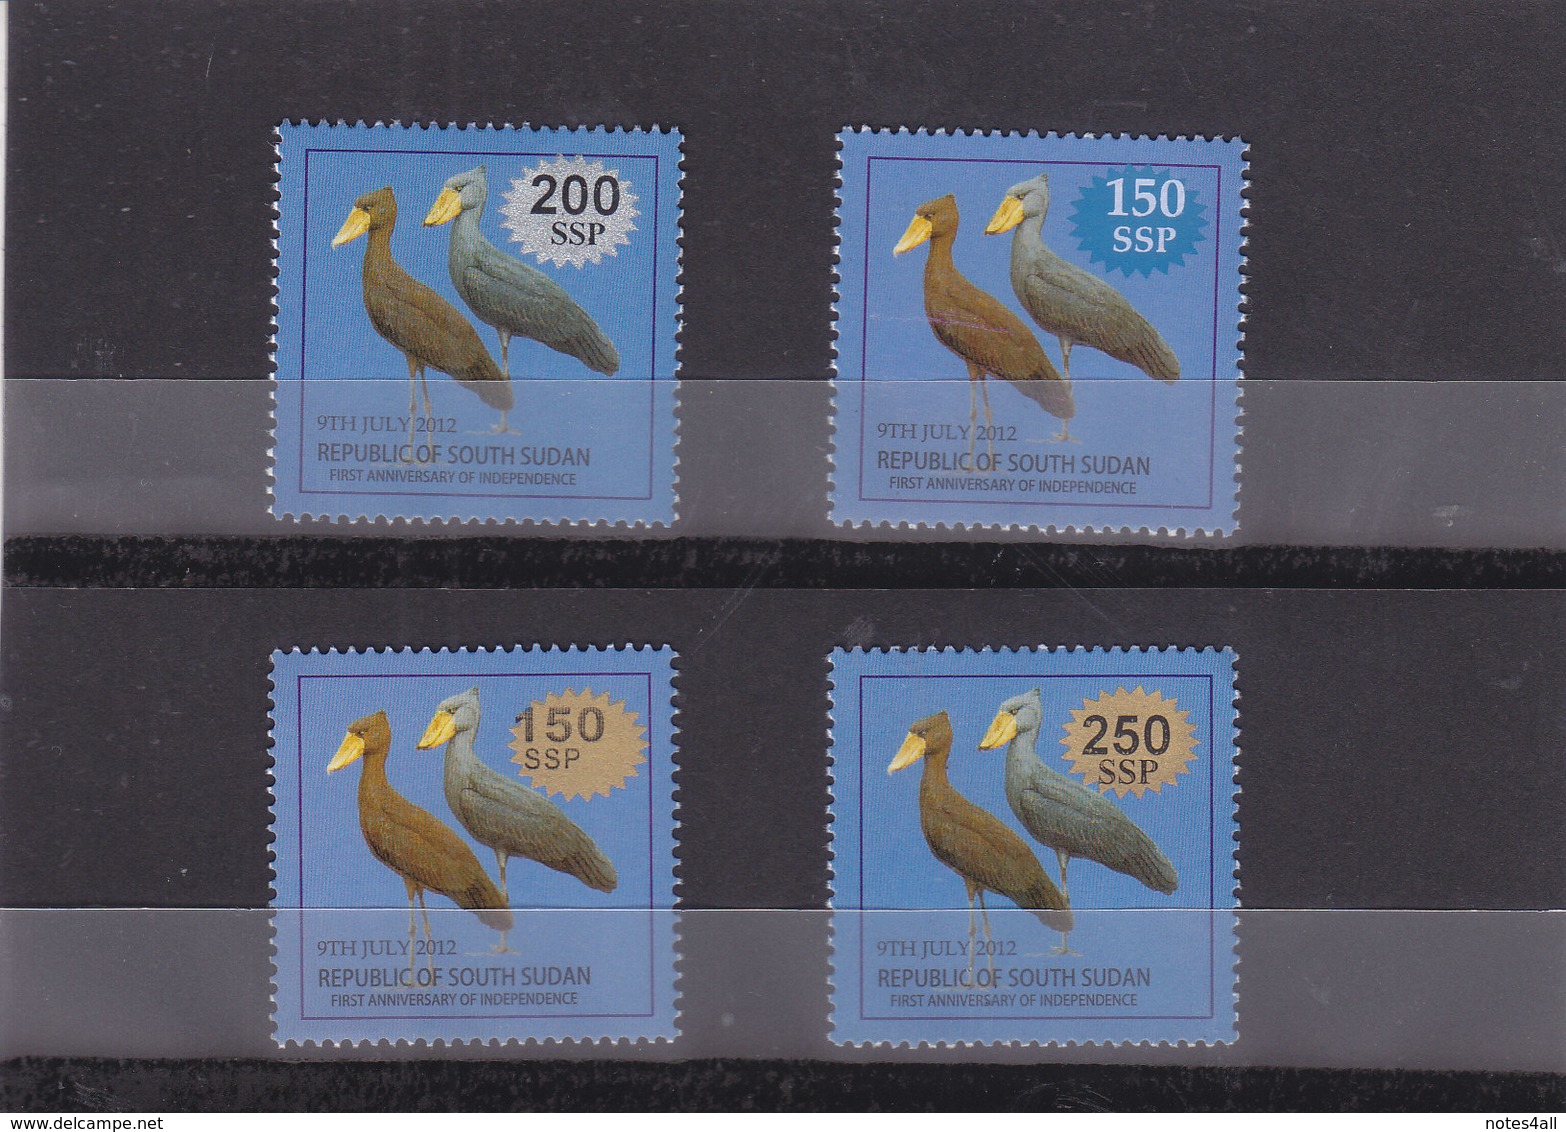 Stamps SOUTH SUDAN 2017 BIRDS OVERPRINT SURCHARGE SET OF 4 MNH */* - South Sudan